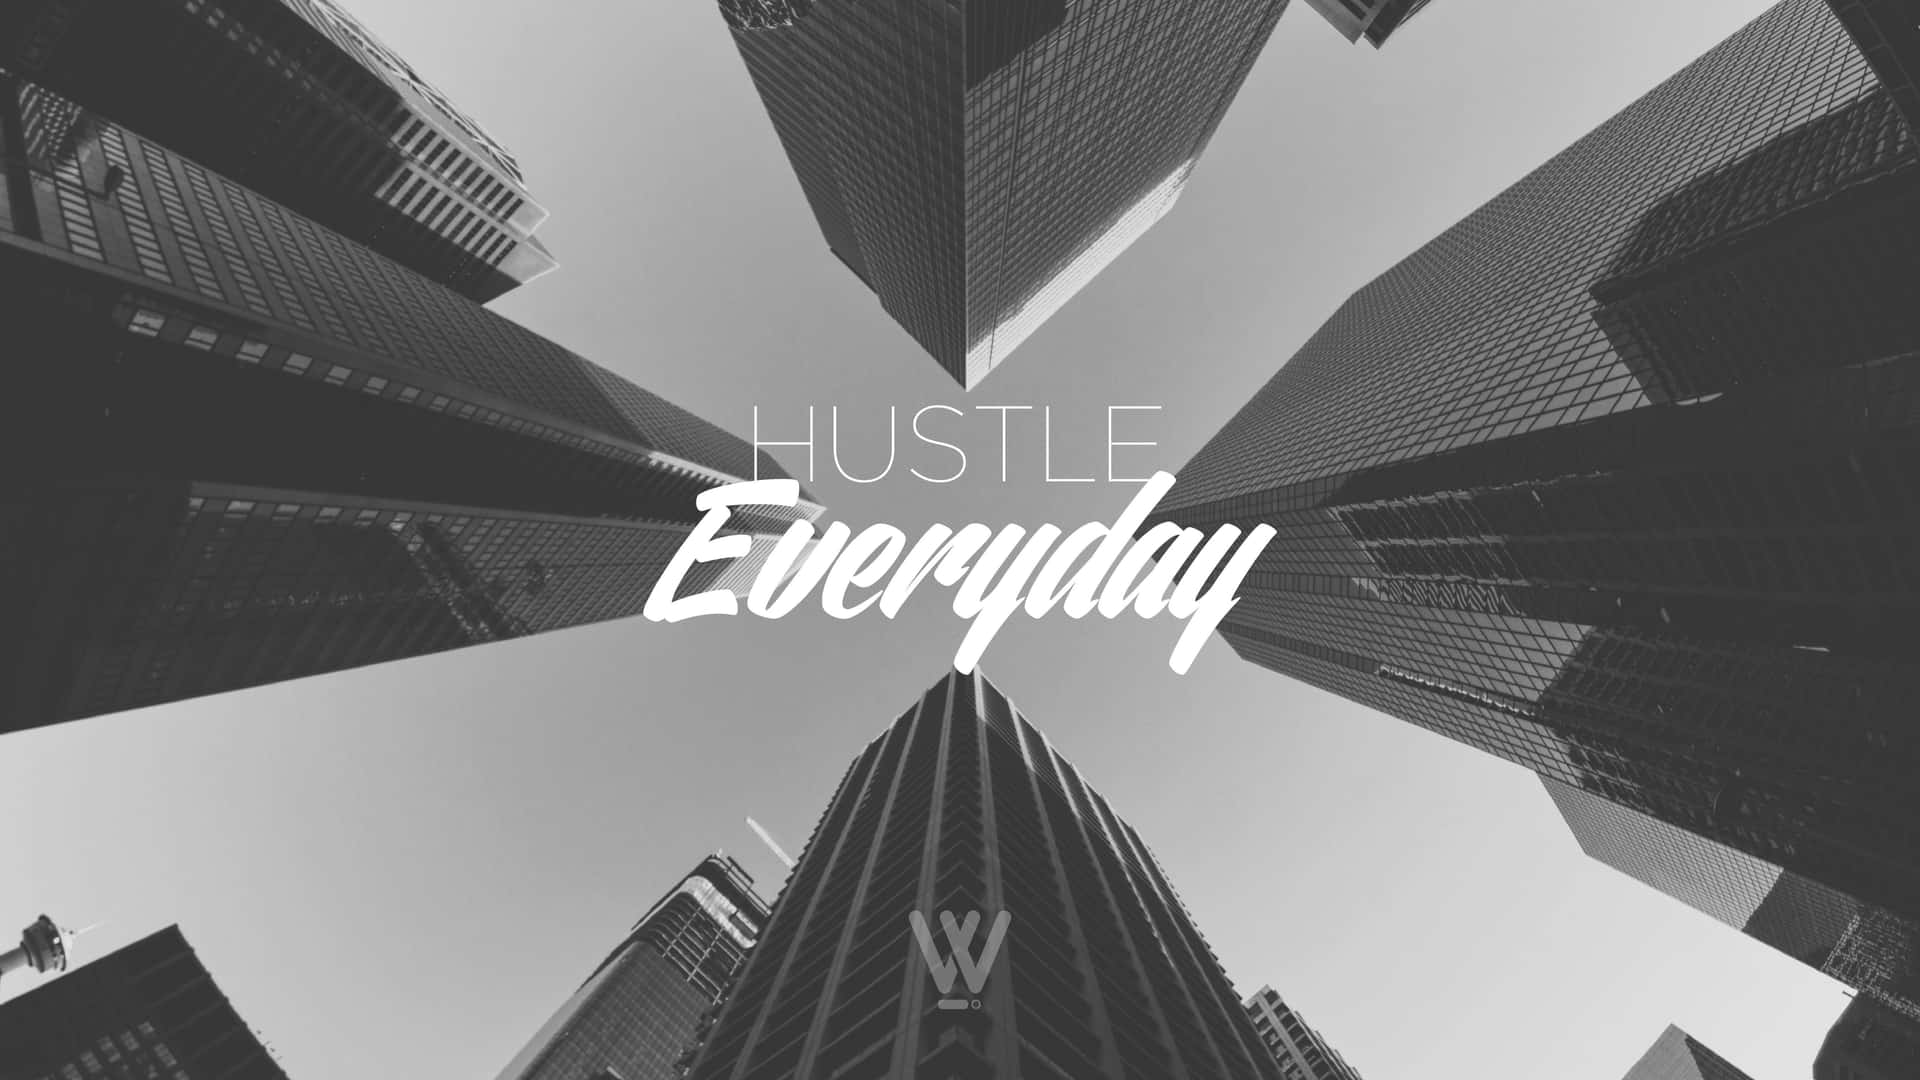 Download Hustle Everyday - W - Ad Wallpaper